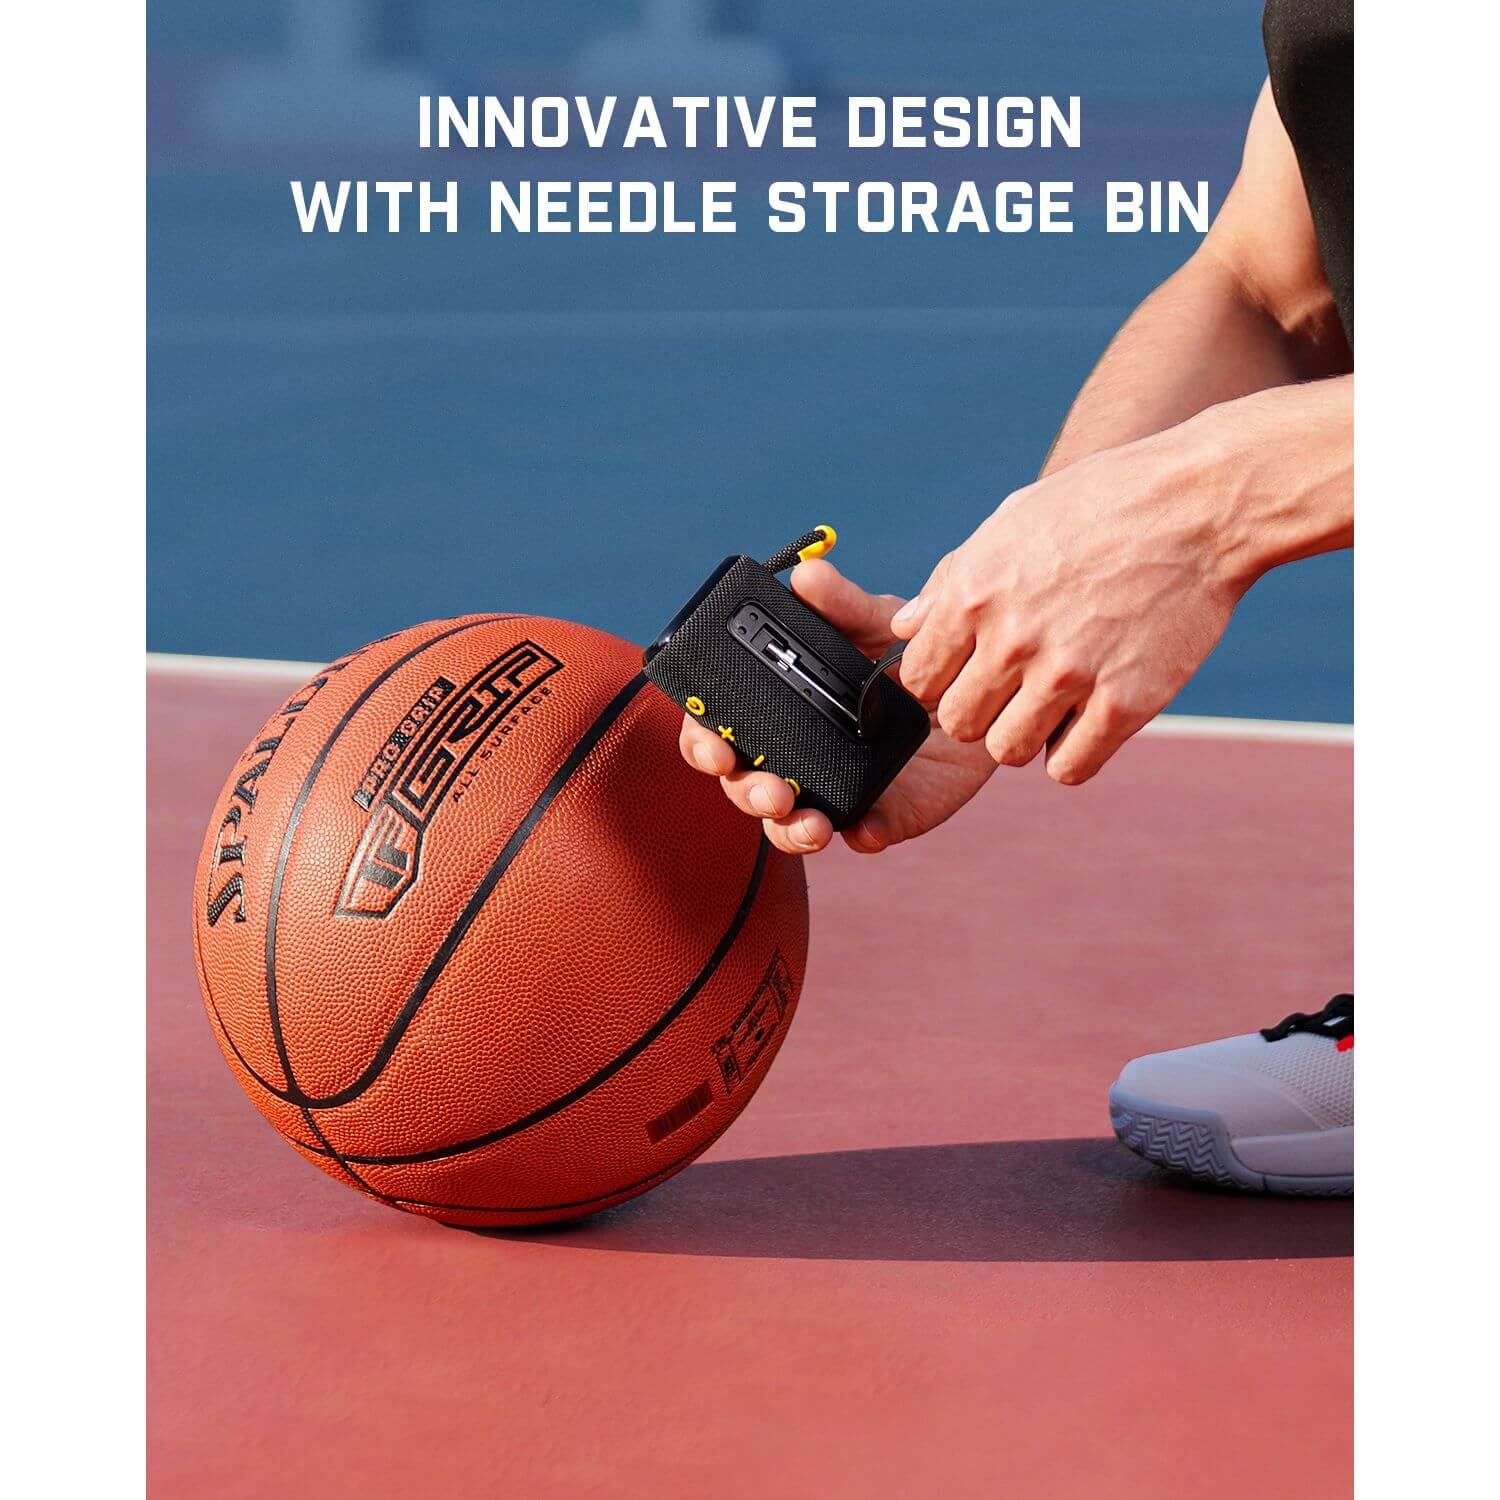 Portable size with needle storage bin, no more hassles of missing needles or needle bending